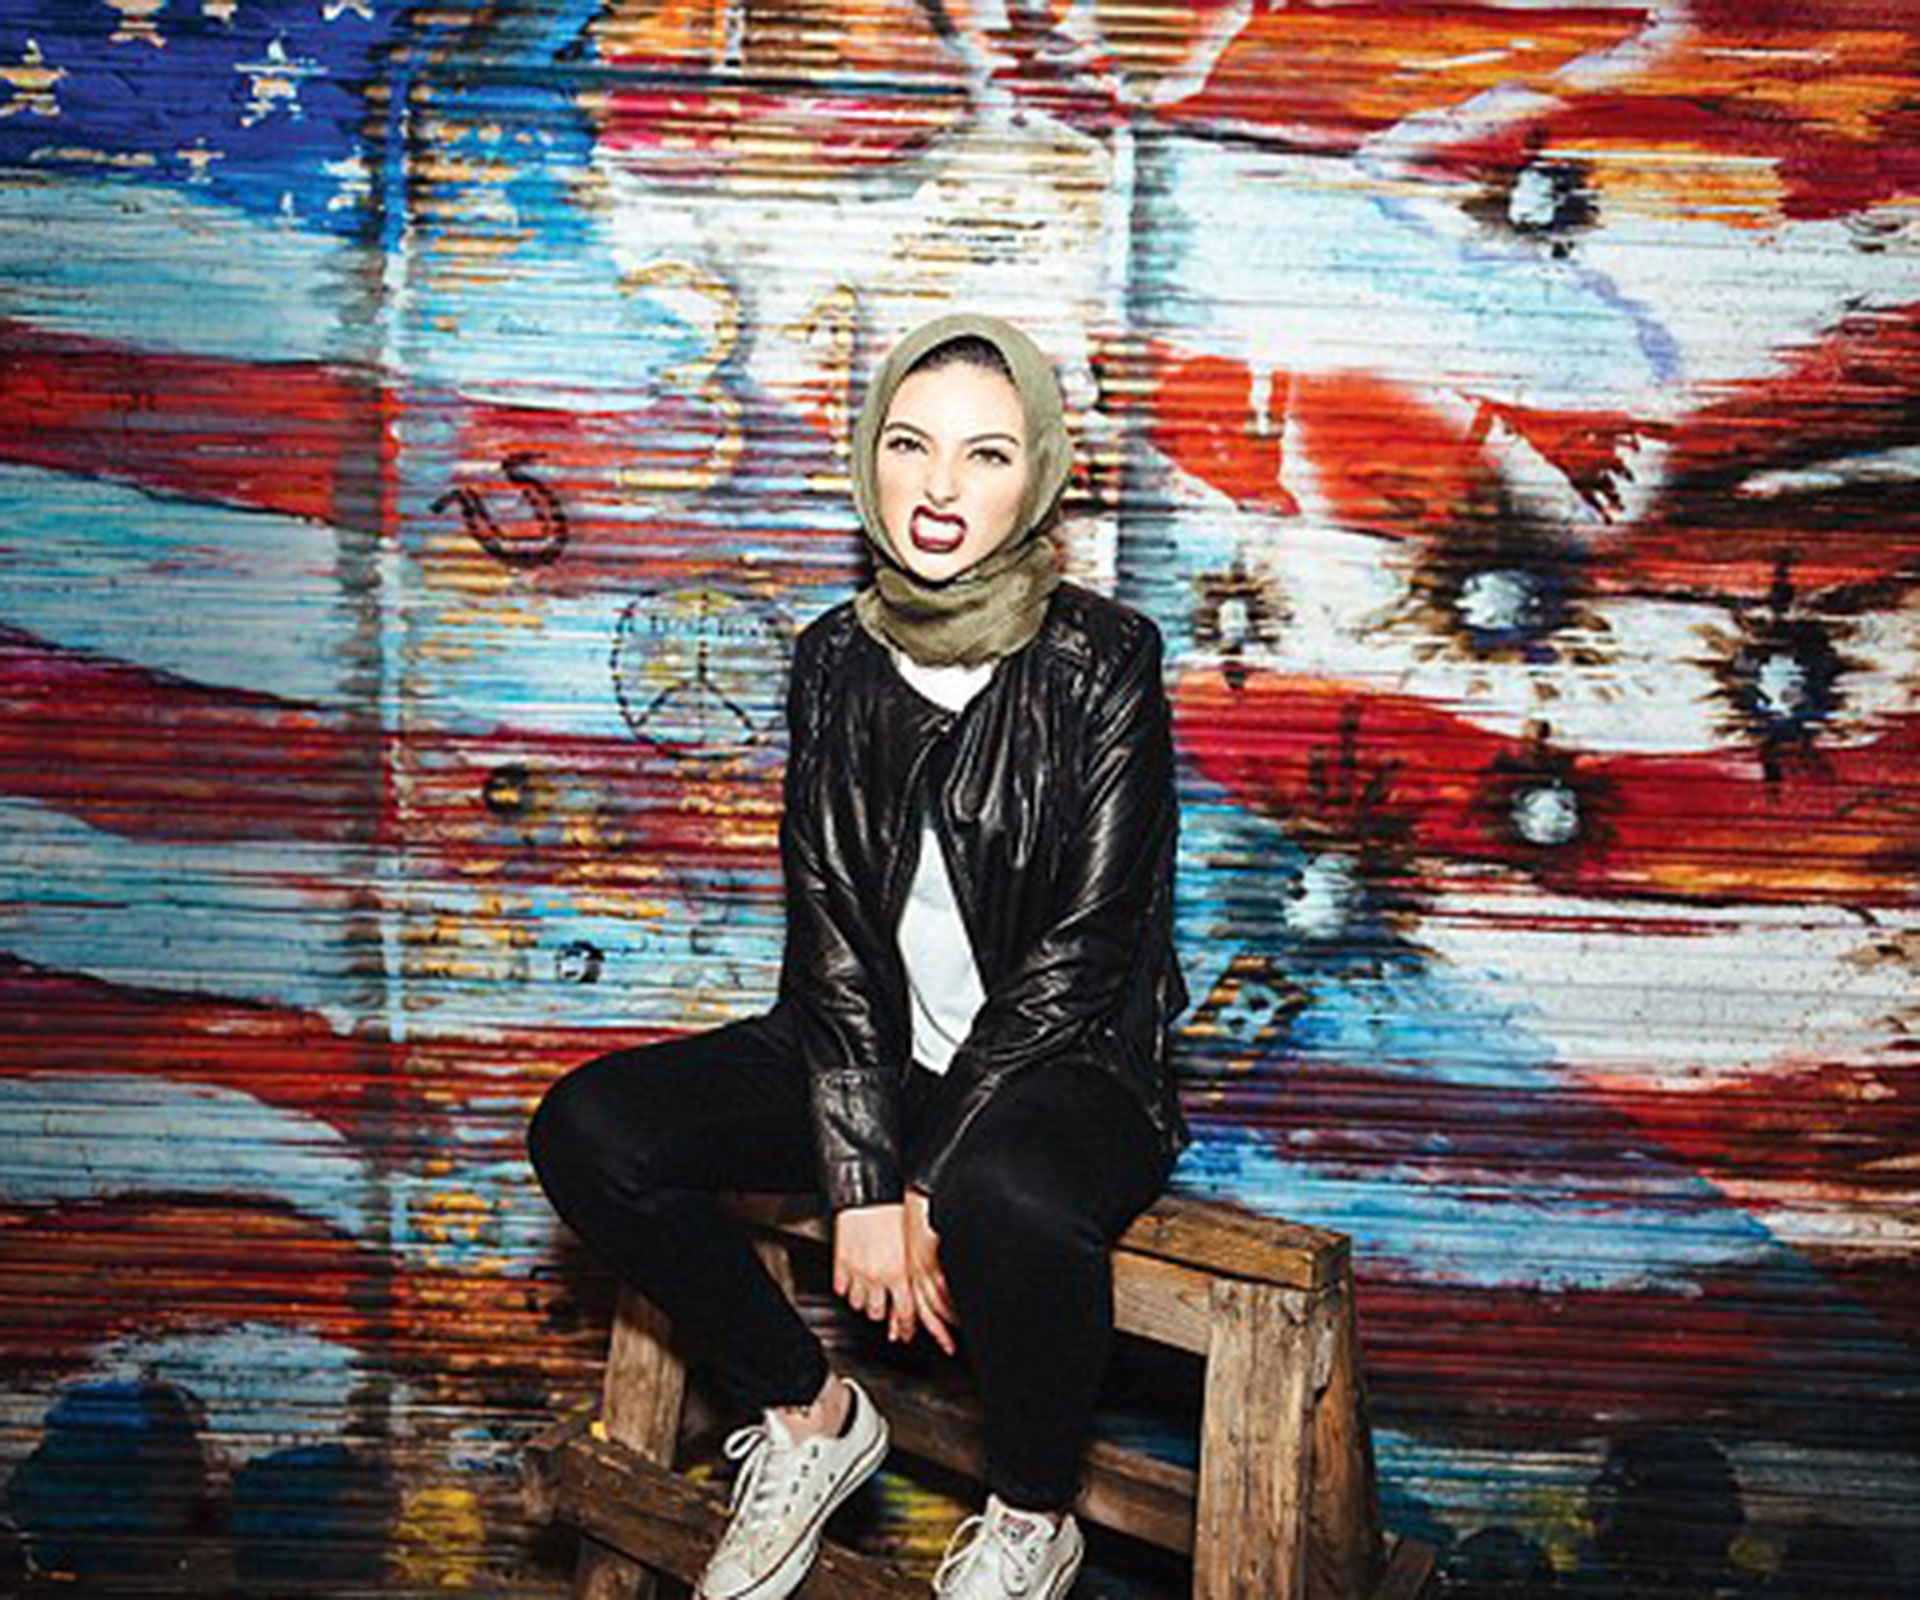 Journalist Noor Tagouri becomes the first woman to wear a hijab in Playboy